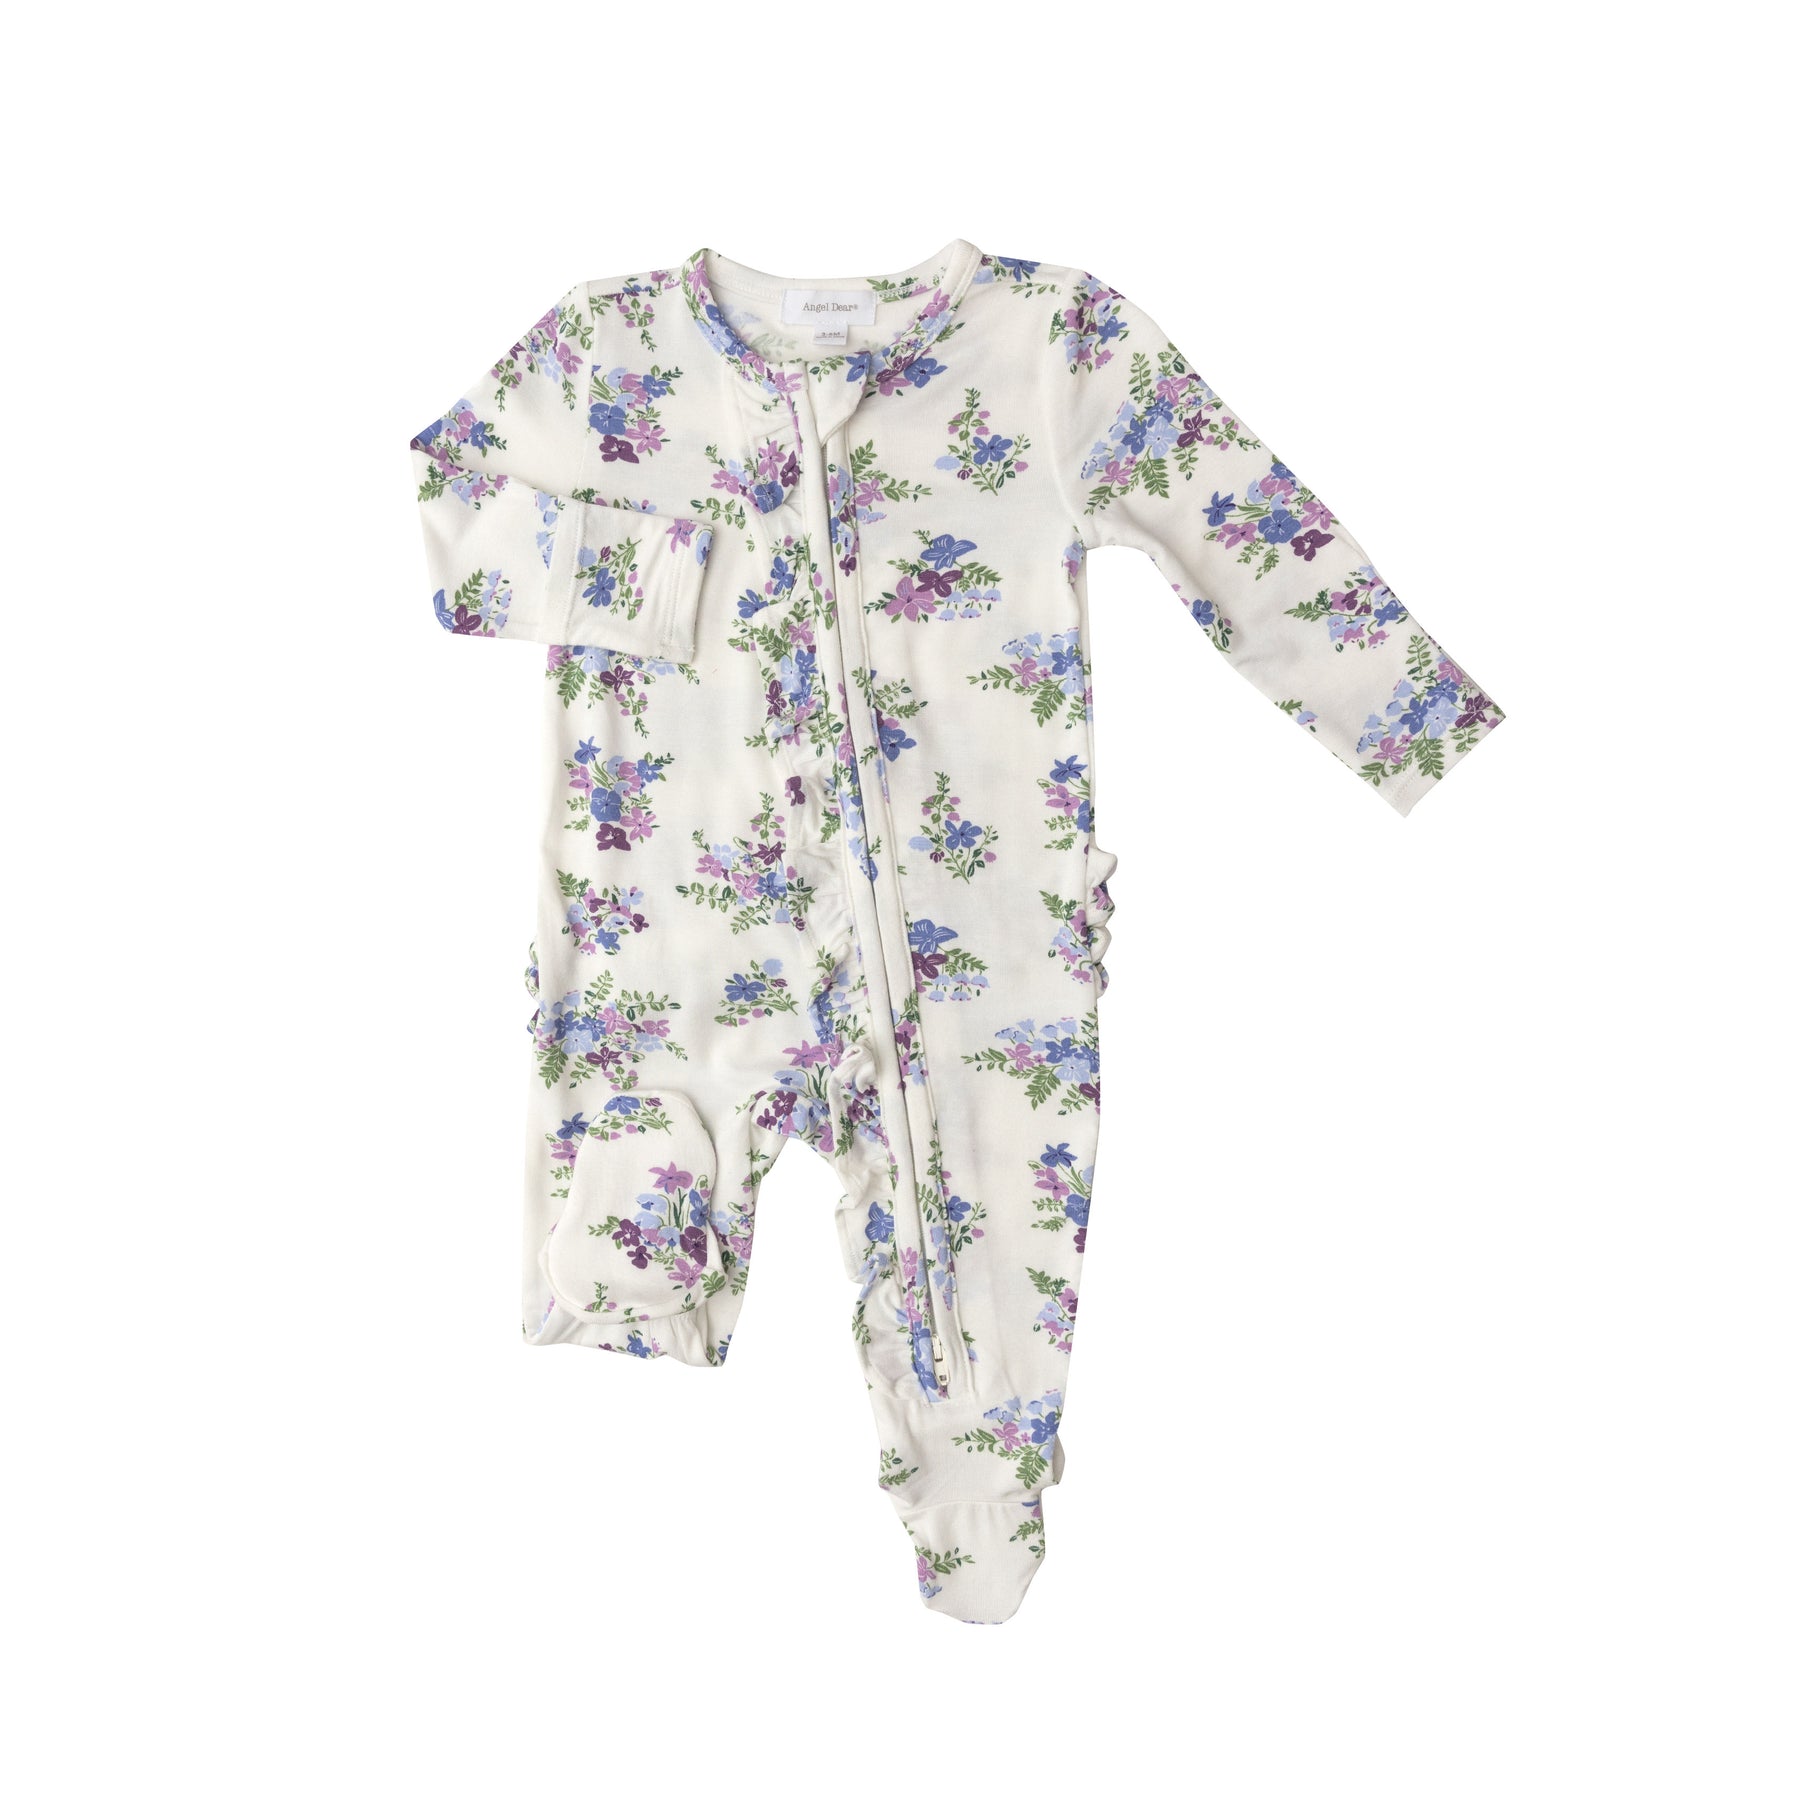 Angel Dear Lily of the Nile Zipper Footie - 18-24 Months